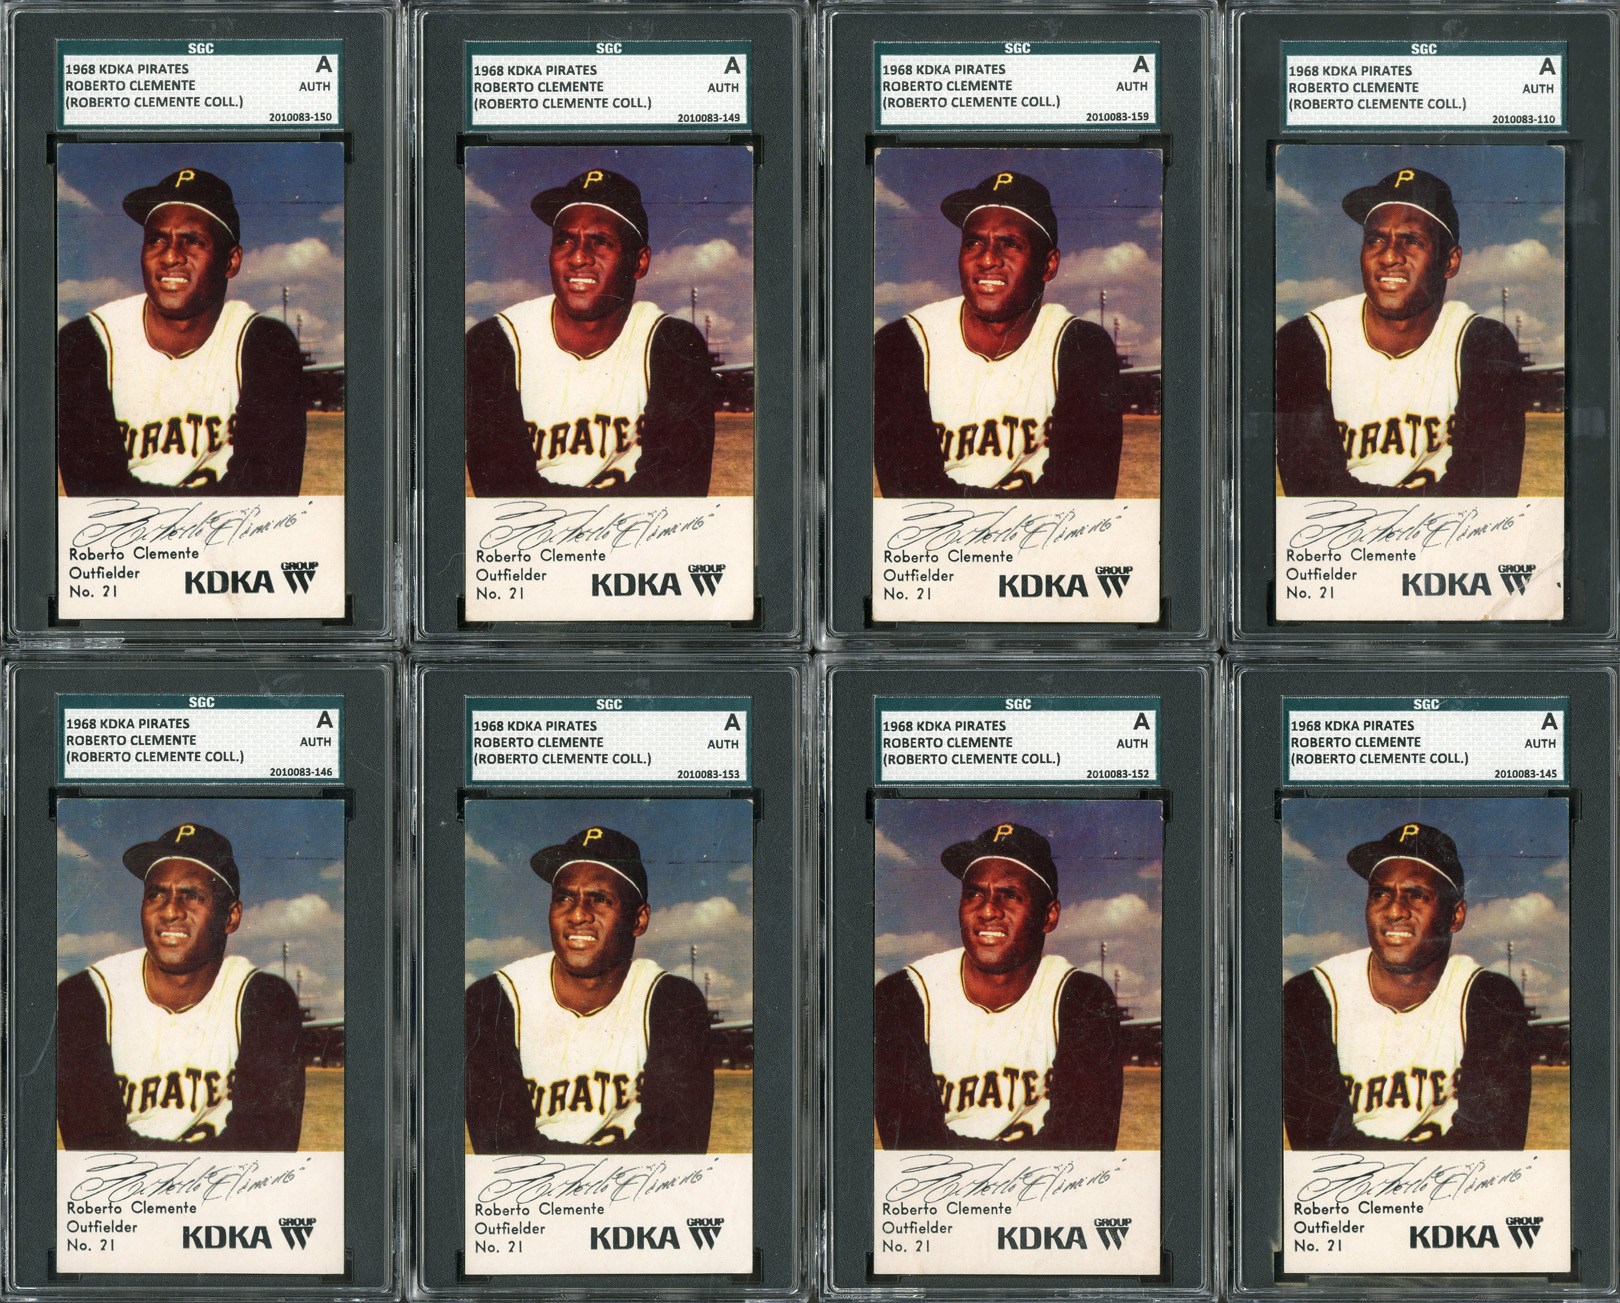 Baseball and Trading Cards - 1968 KDKA Pirates Roberto Clemente (from Clemente Collection) - SGC AUTH